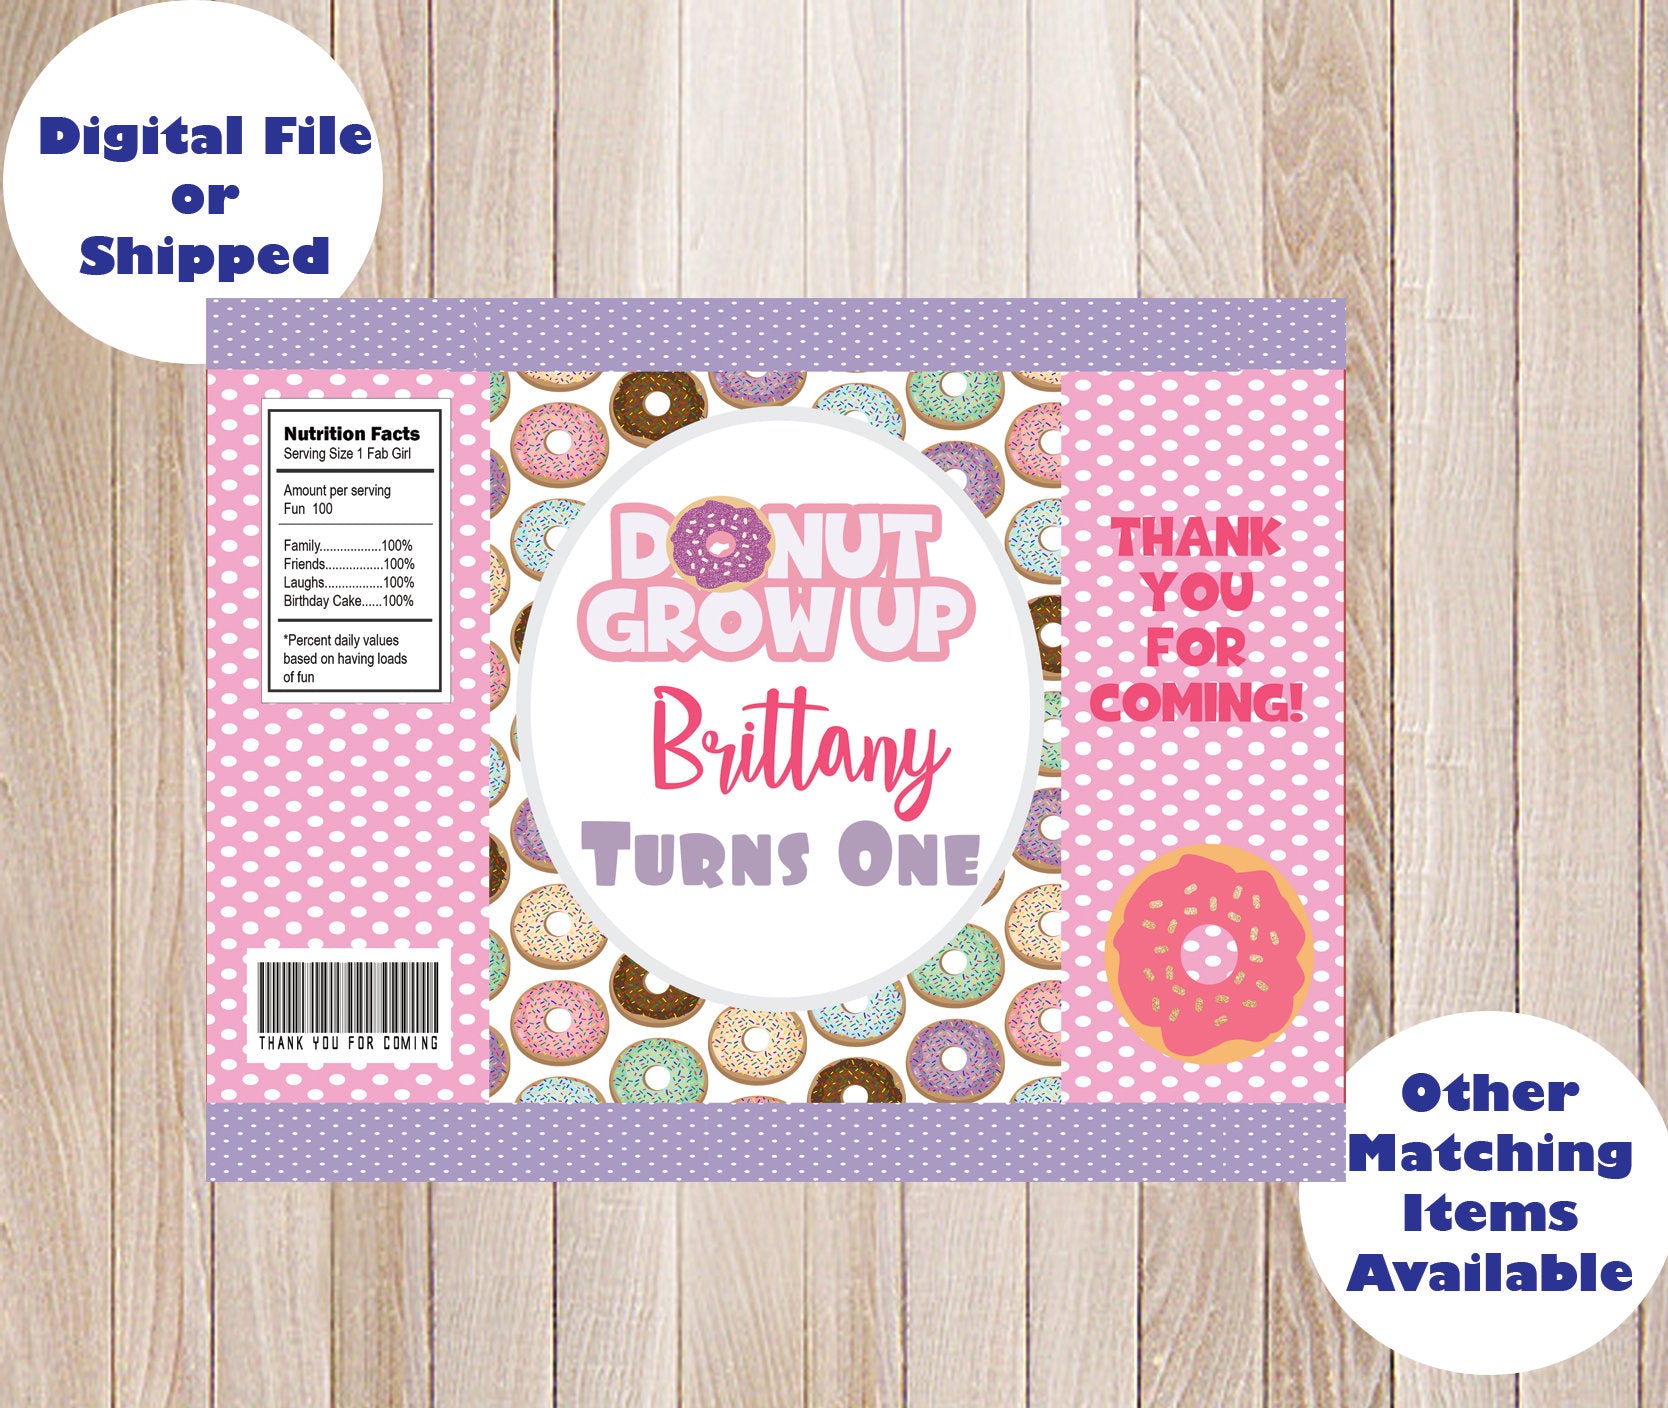 SHIPPED PRINTED Donut Grow Up First Birthday, 1st Birthday, Doughnut Party Birthday chip / treat / party / favor / goodie / candy bag